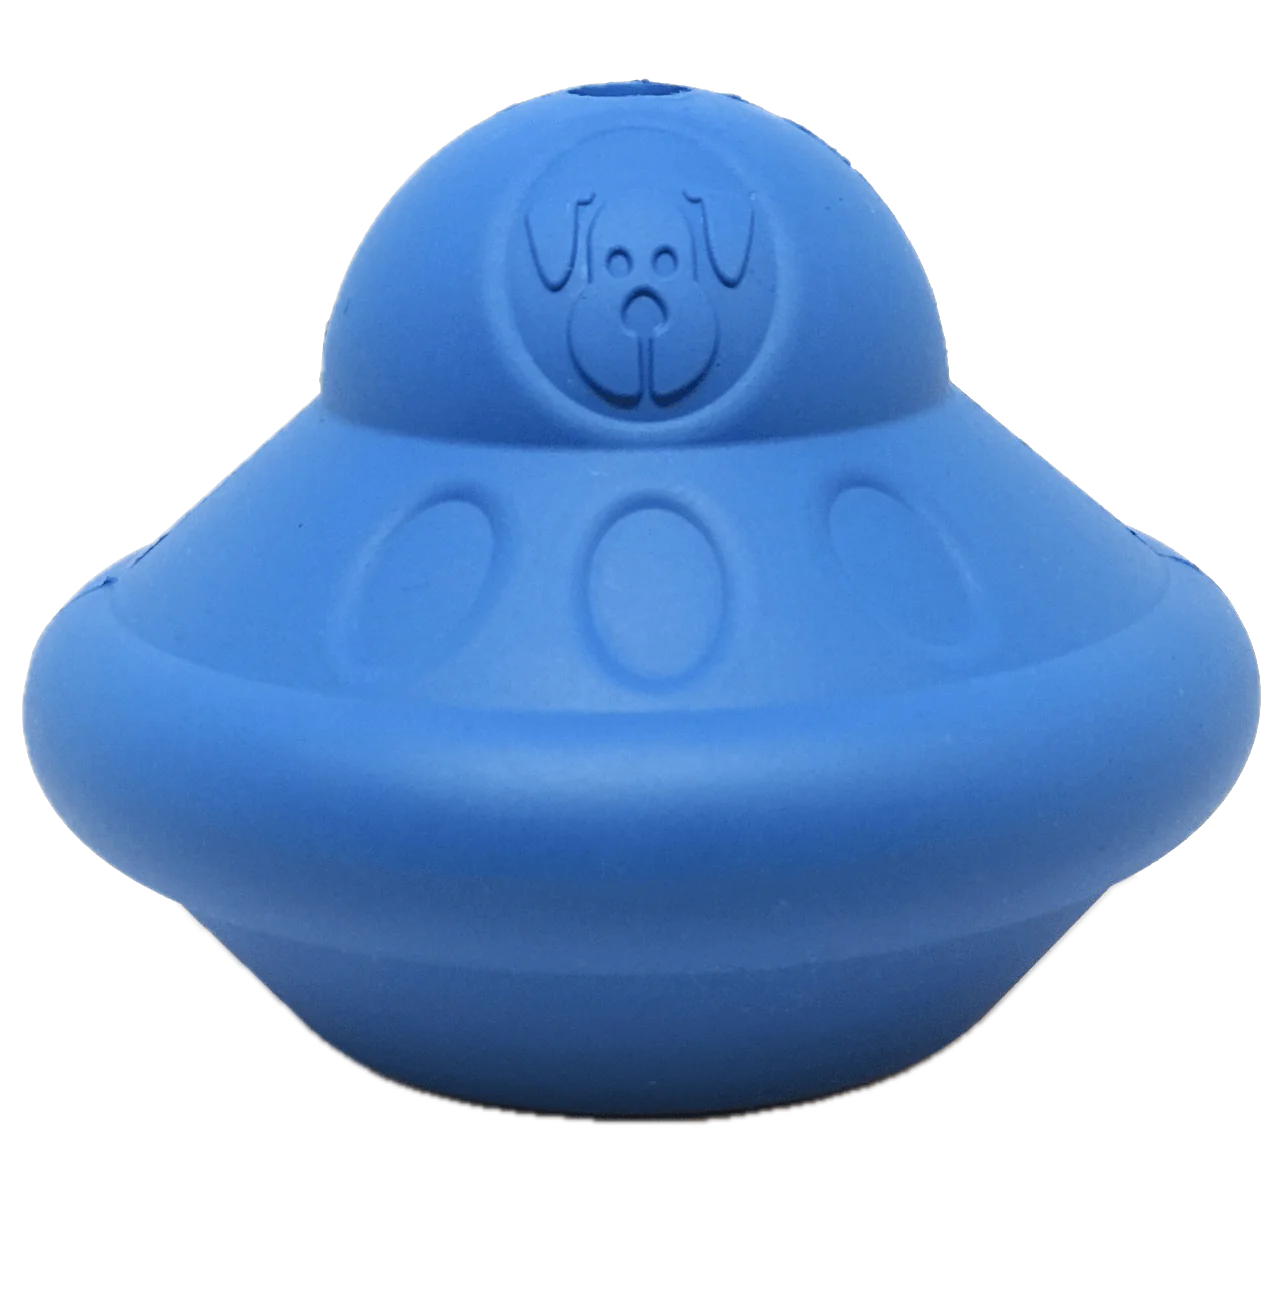 SODAPUP-DURABLE-FLYING-SAUCER-RUBBER-CHEW-TOY